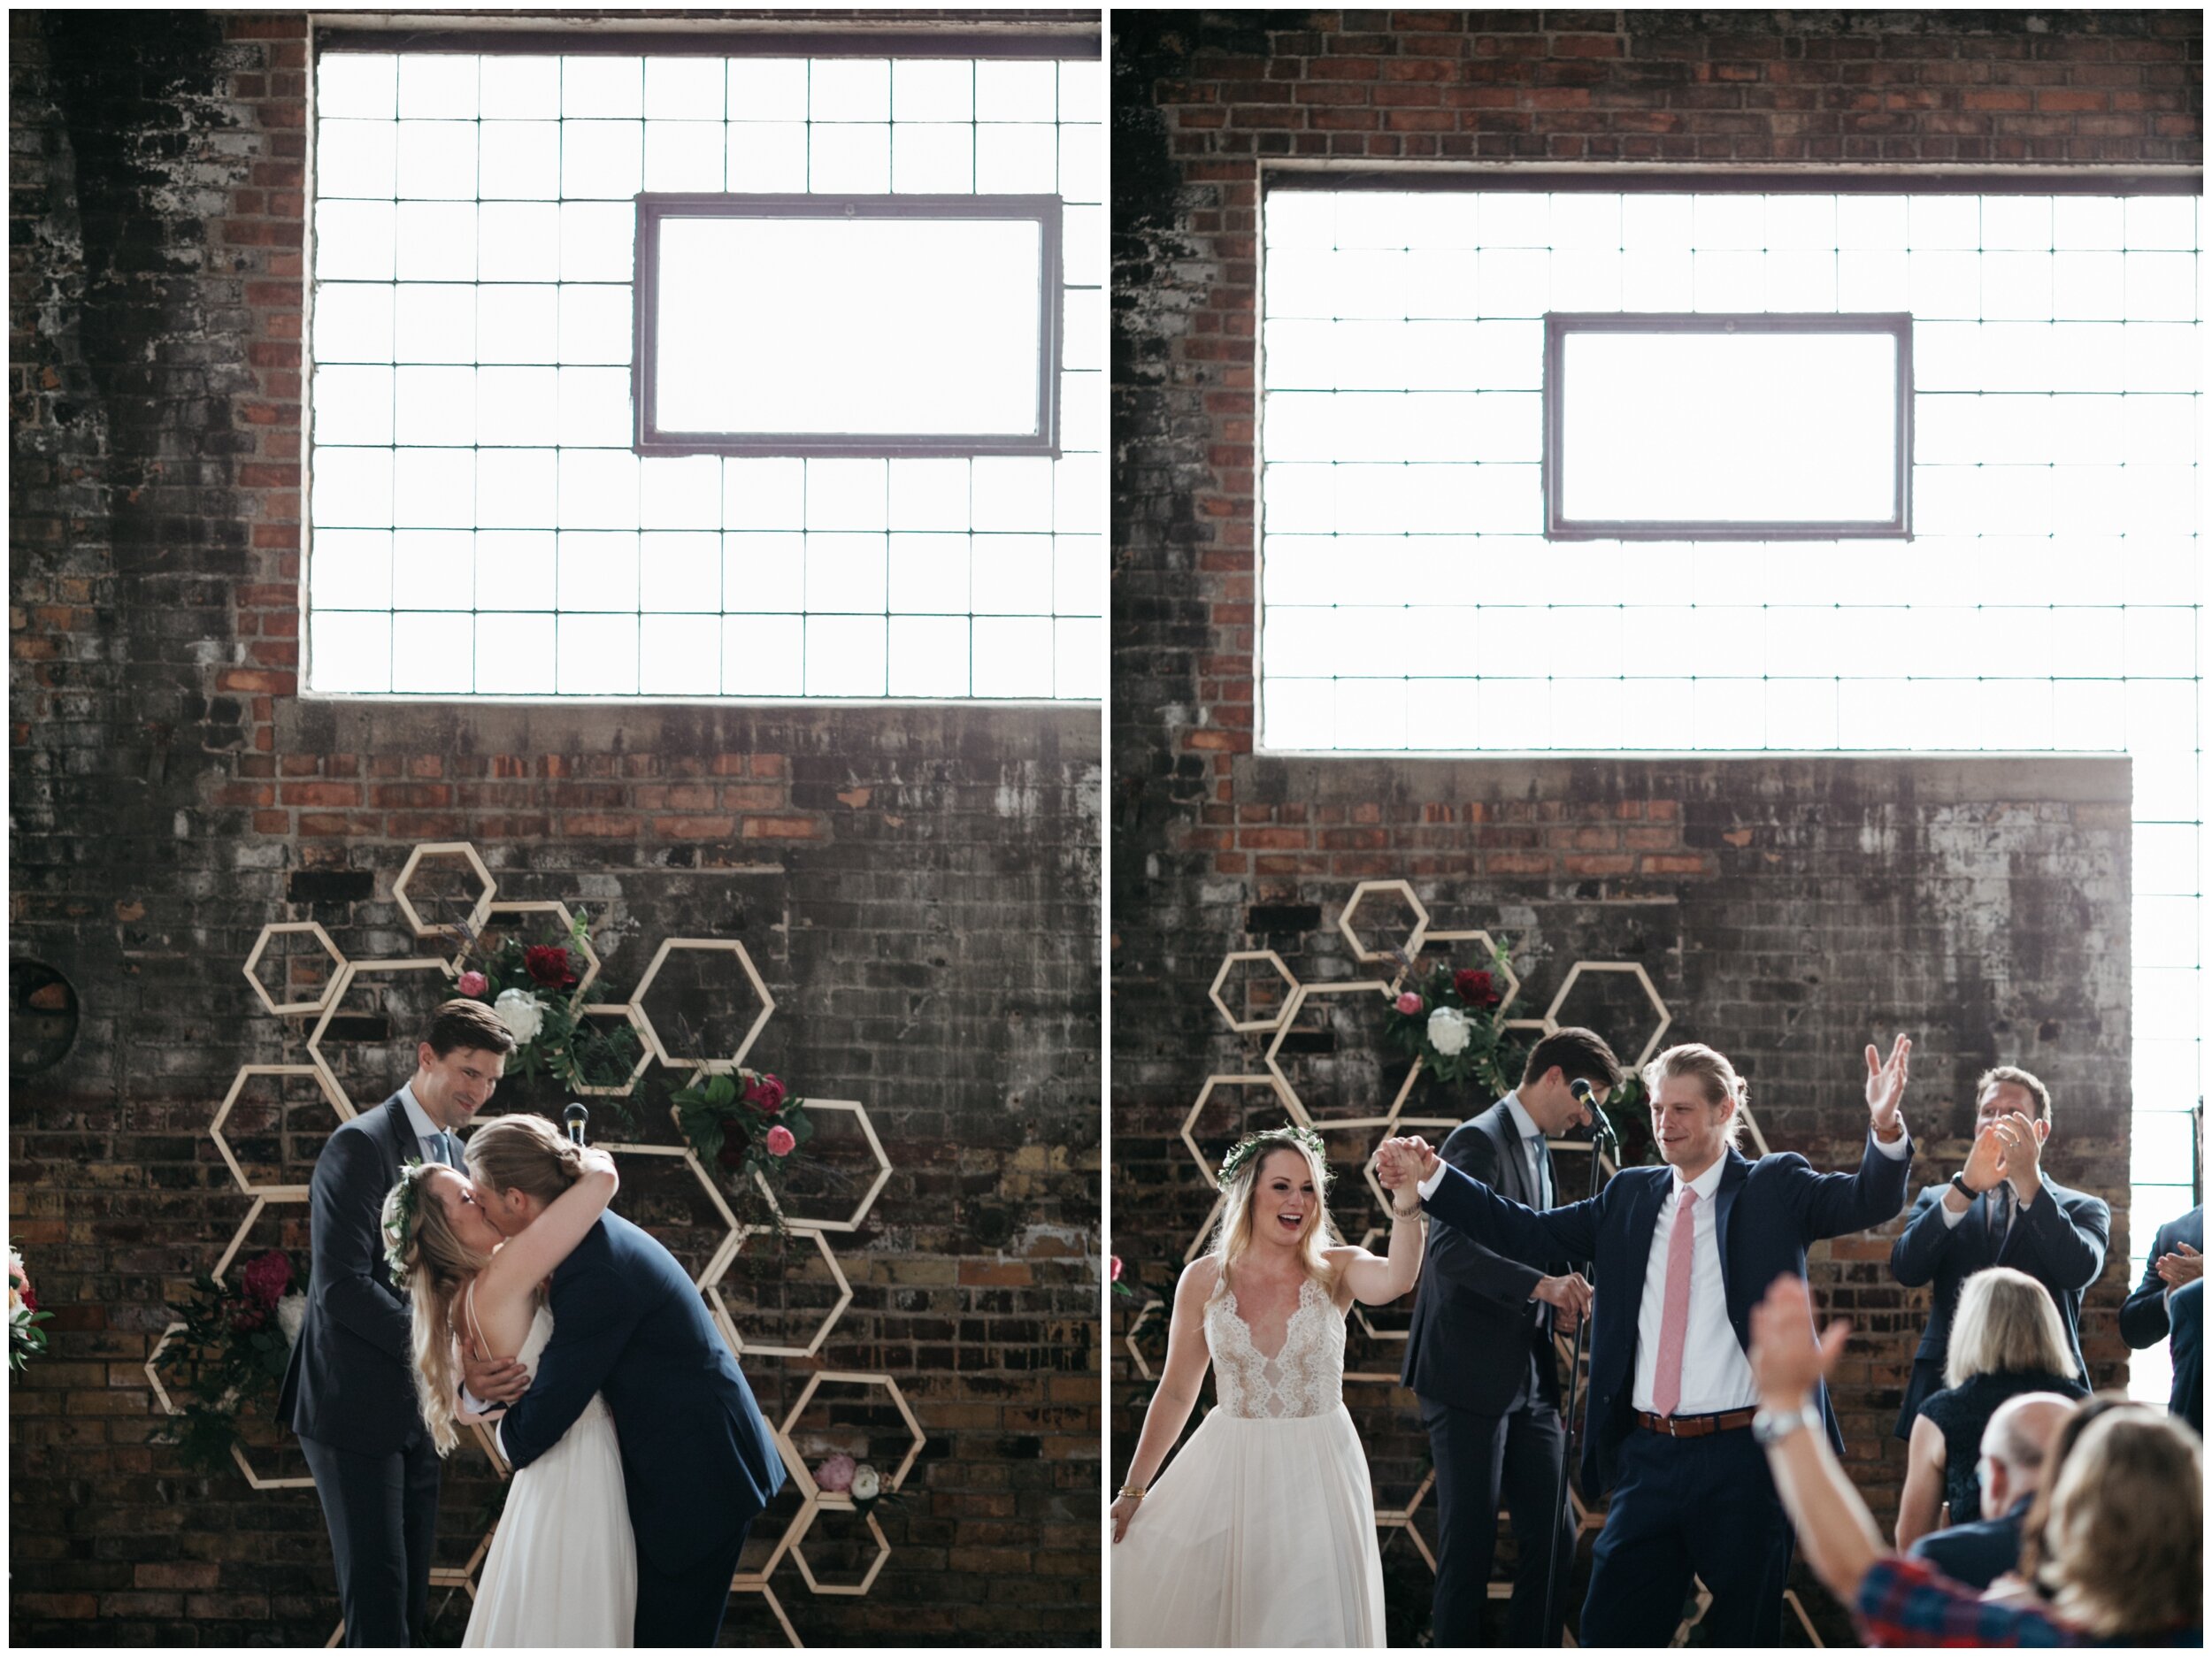 Bride and groom kiss during wedding in industrial warehouse